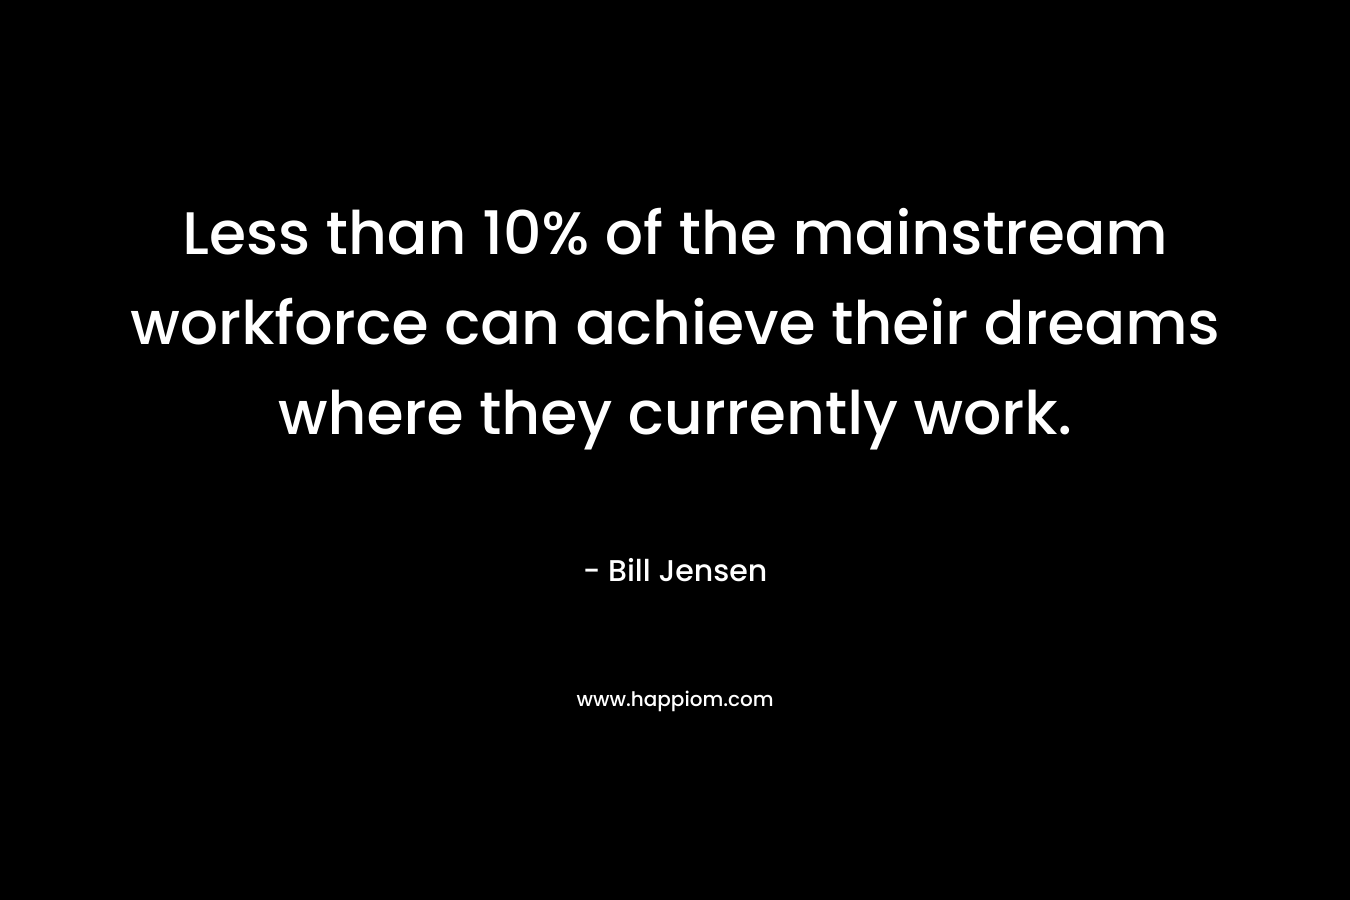 Less than 10% of the mainstream workforce can achieve their dreams where they currently work.